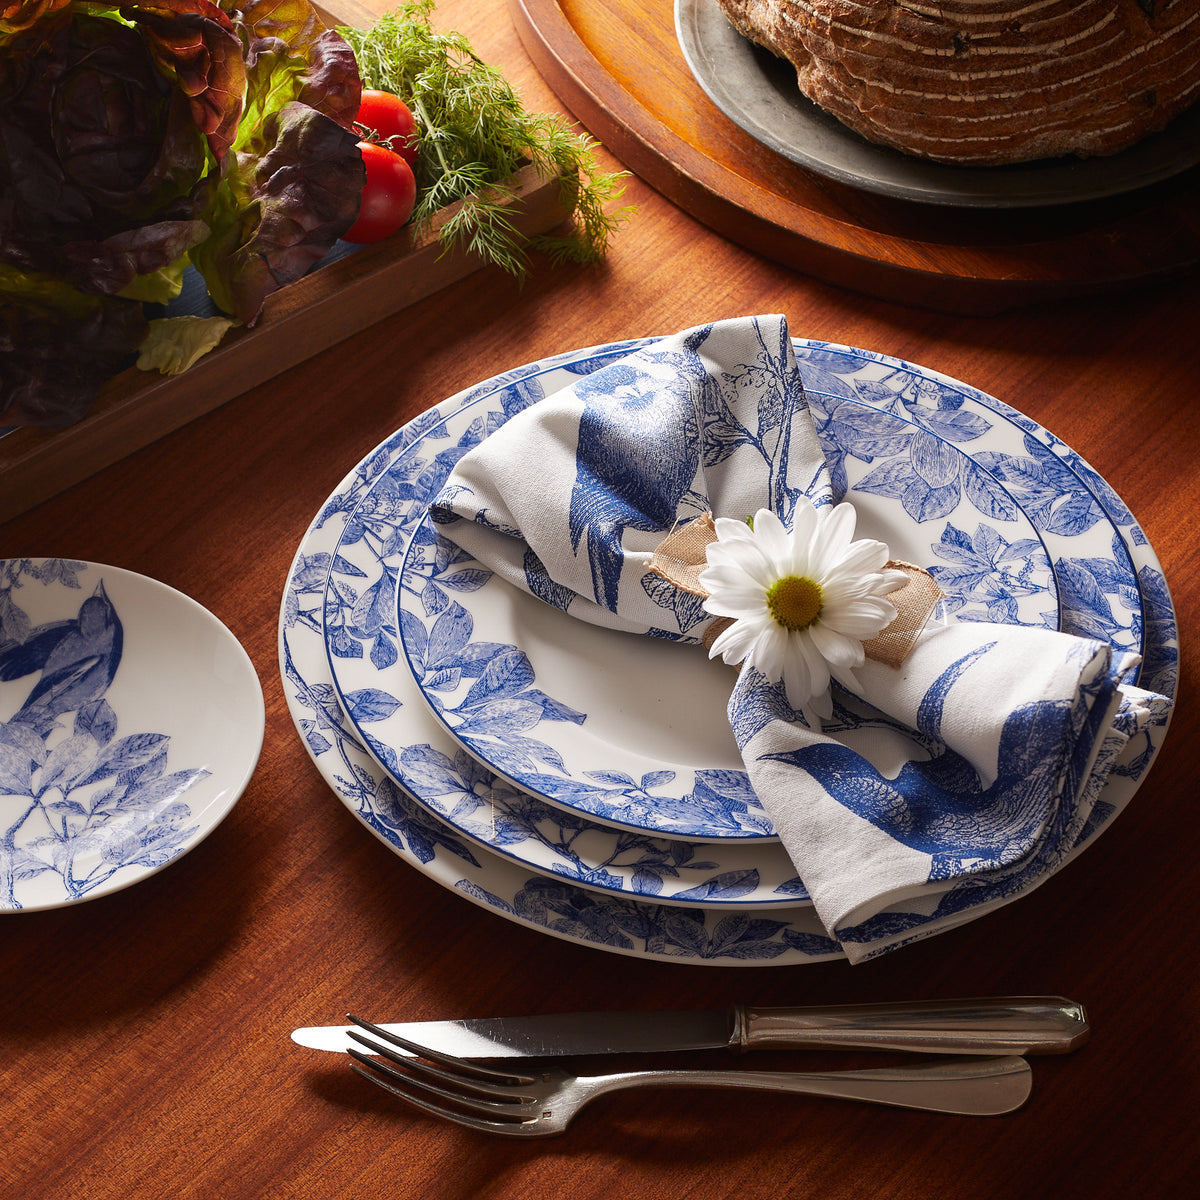 A table setting with blue and white floral-patterned Arbor Rimmed Dinner Plates from Caskata Artisanal Home, showcasing heirloom-quality dinnerware, is stacked with a napkin and daisy on top. Silverware lies beside, and vegetables are in the background.